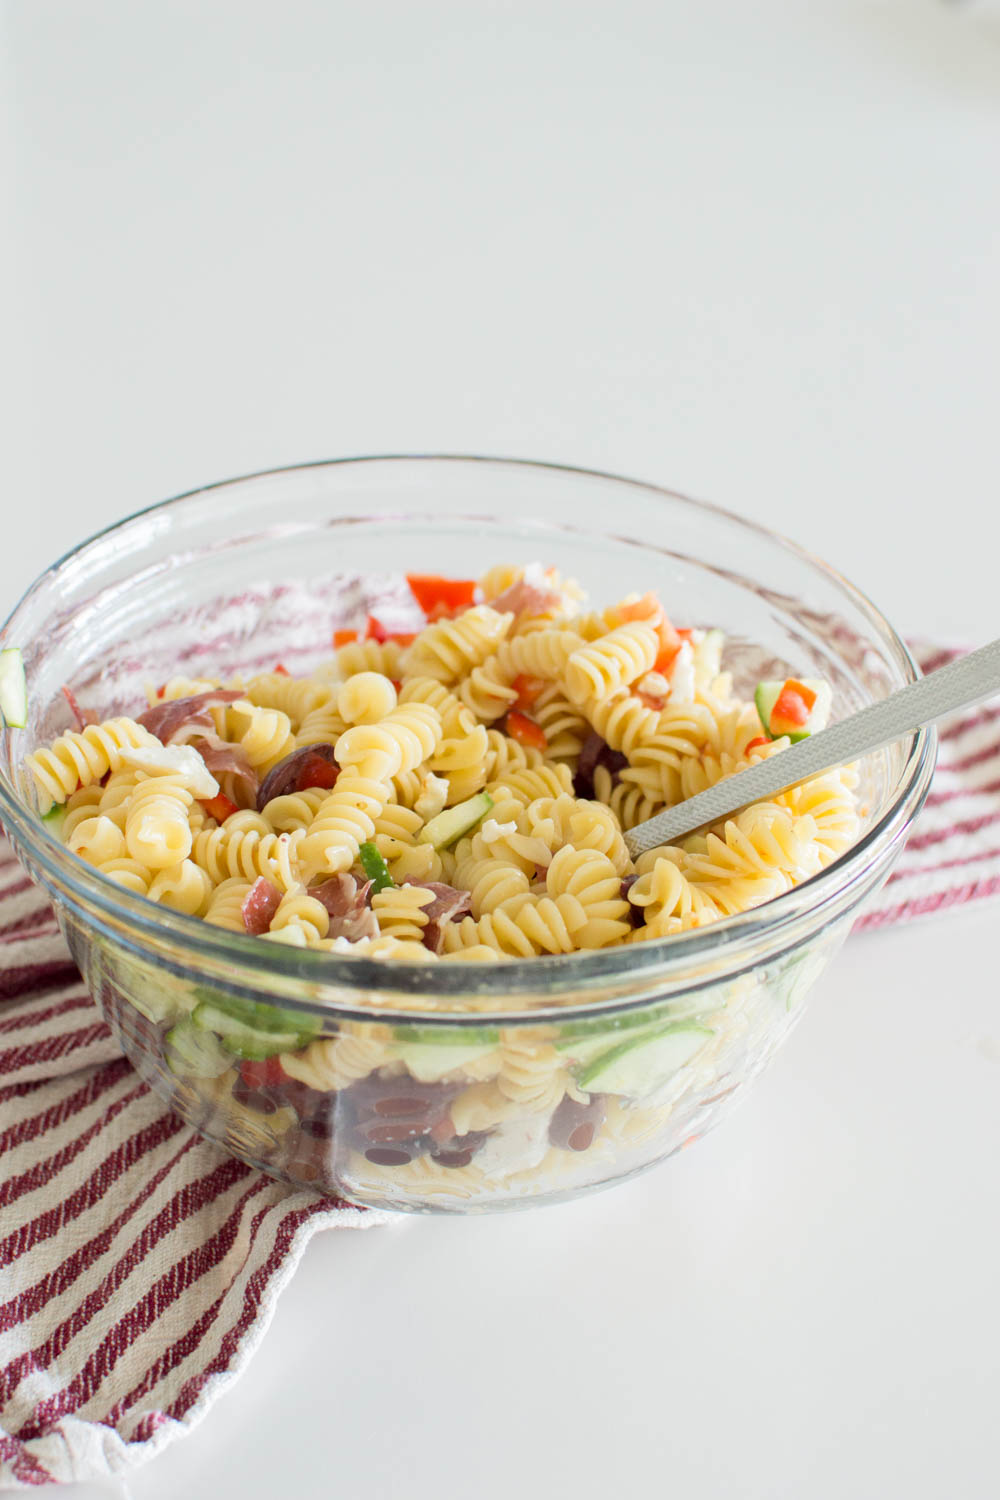 A large glass bowl filled with homemade pasta salad